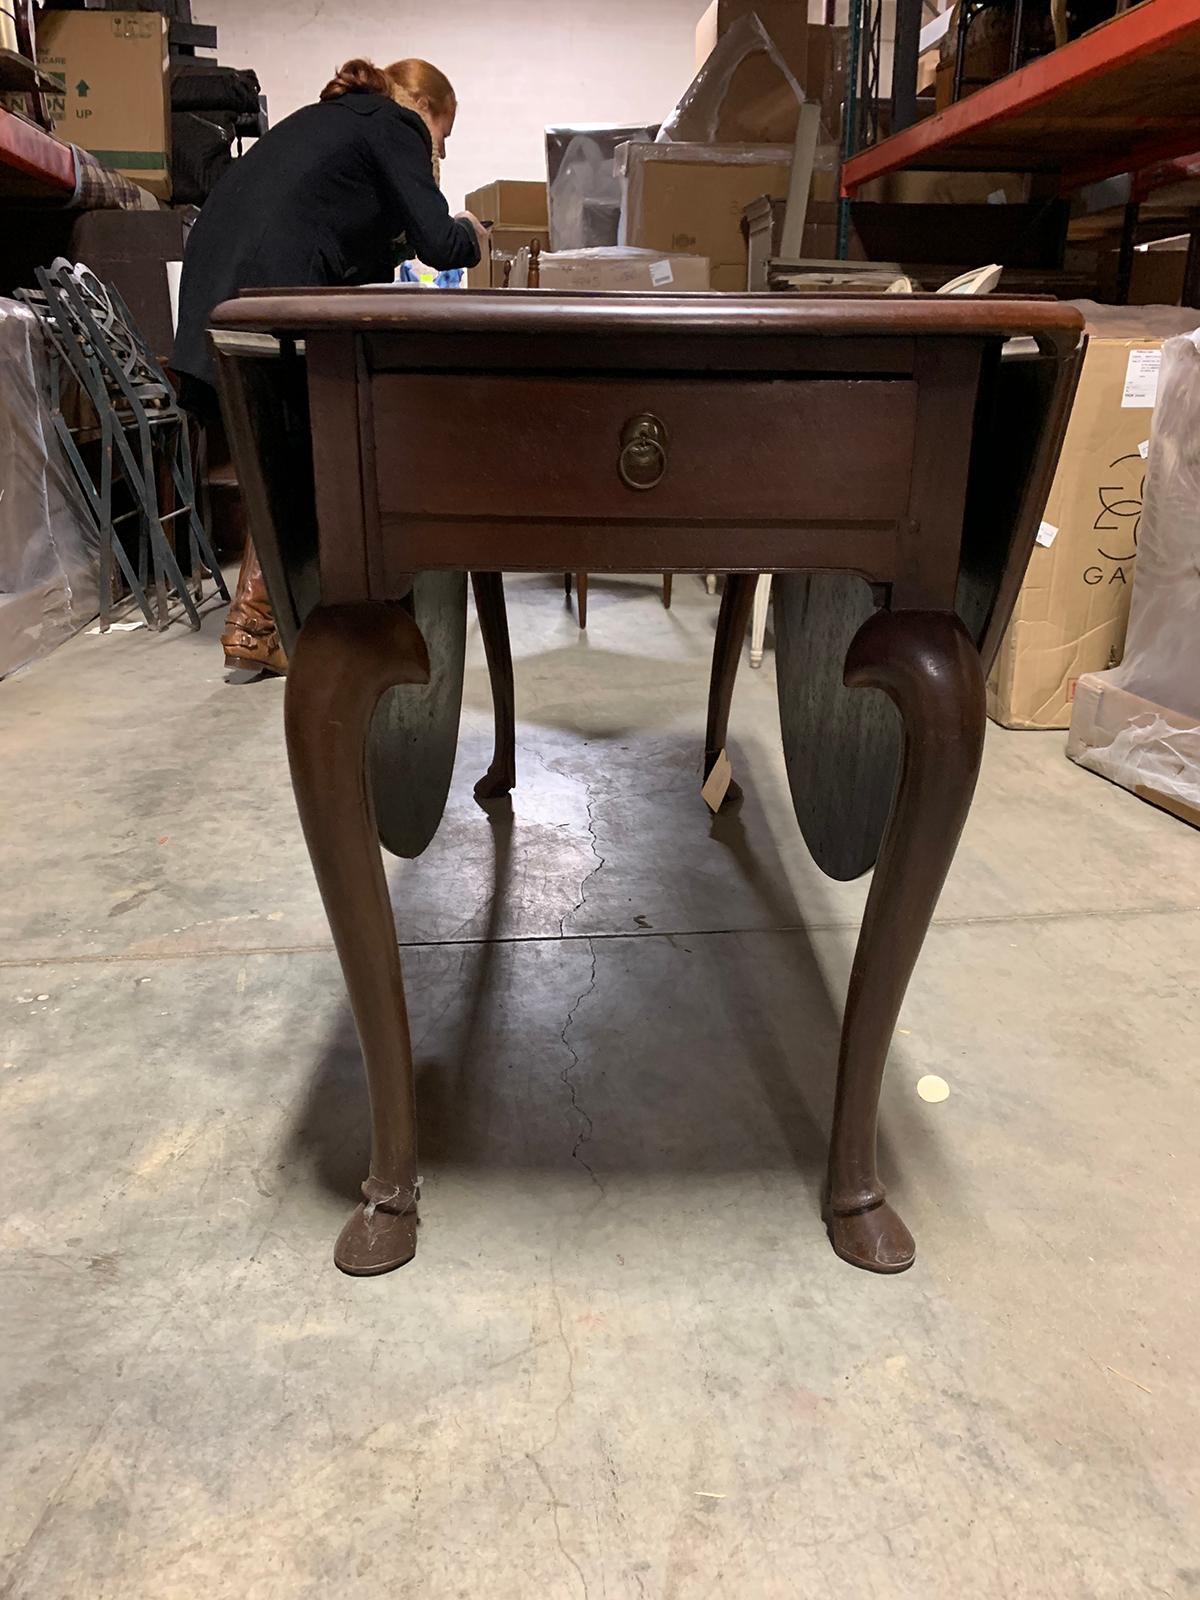 Late 18th-early 19th century mahogany drop-leaf table
Overall: 66